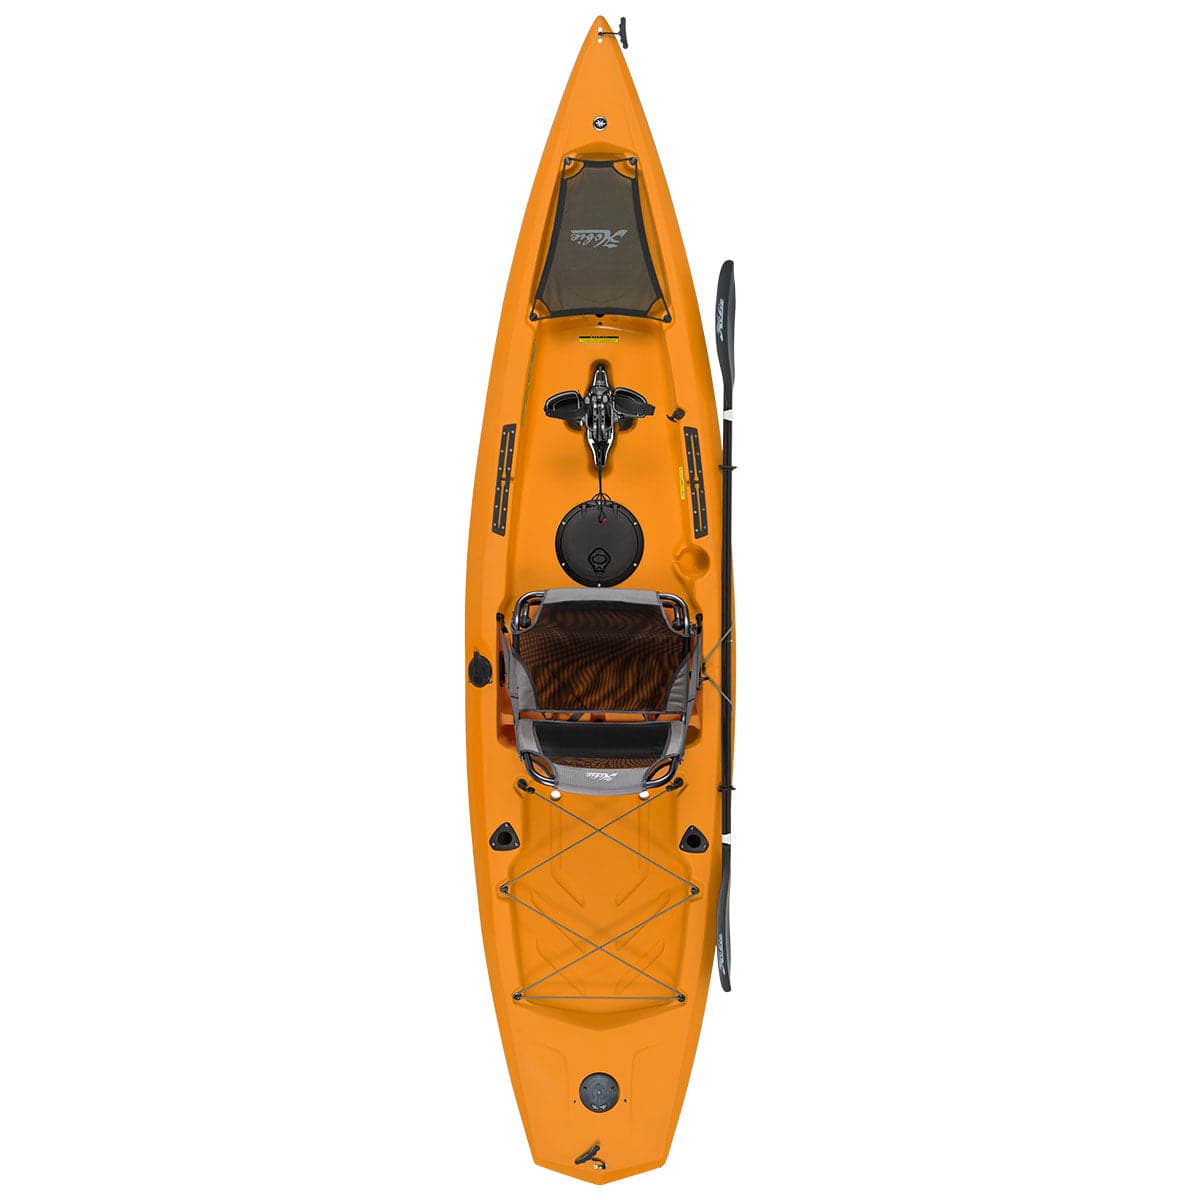 Featuring the Mirage Compass 12 fishing kayak, pedal drive kayak manufactured by Hobie shown here from a second angle.